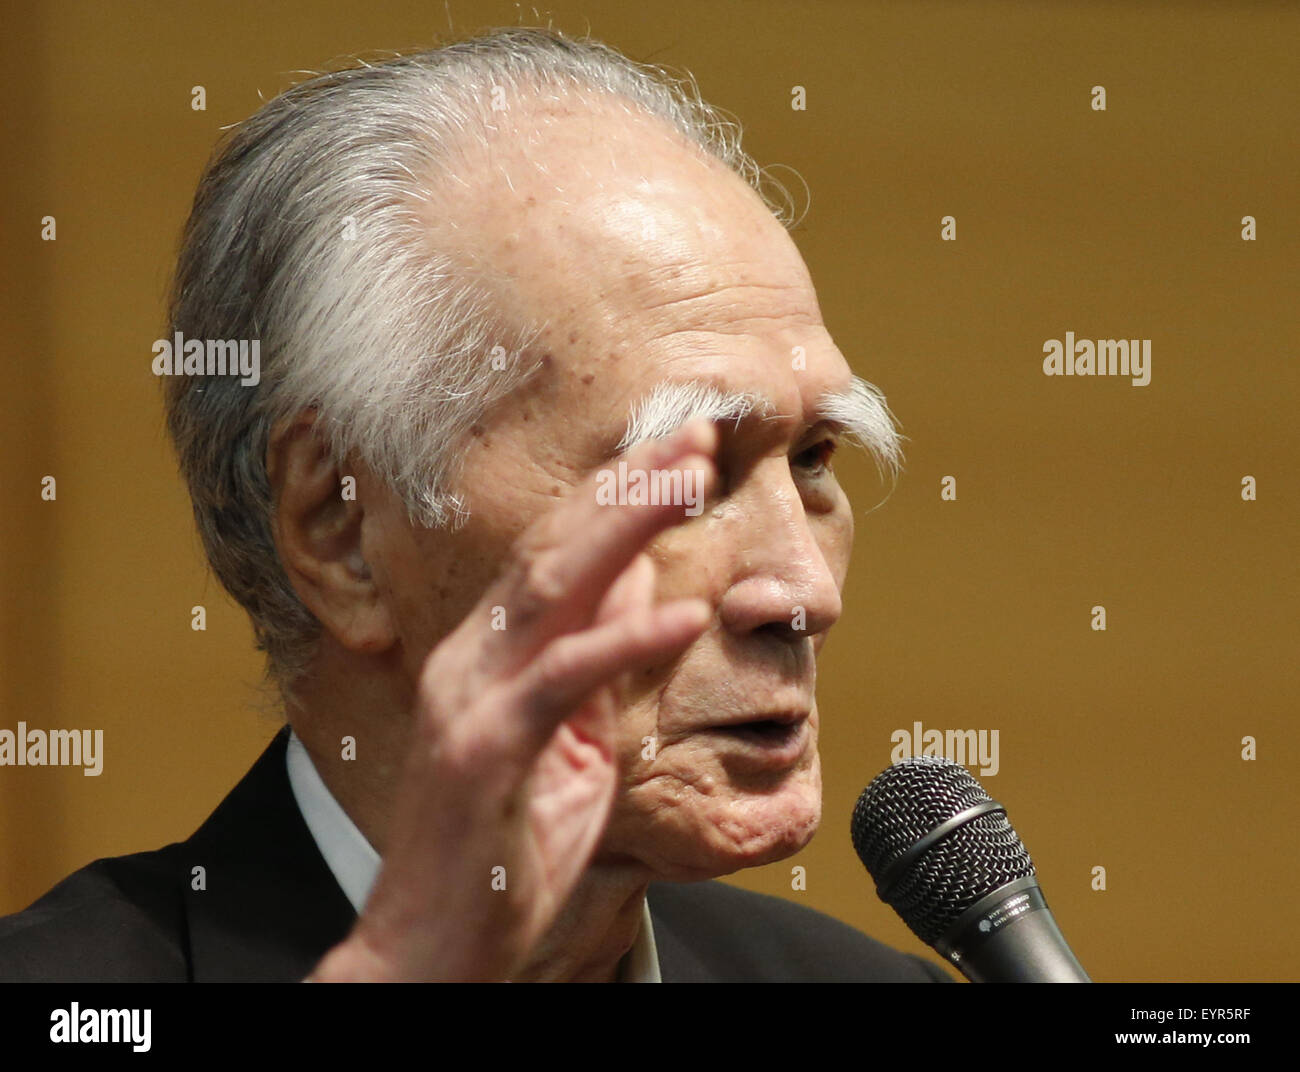 Tokyo, Japan. 3rd Aug, 2015. Tomiichi Murayama, former Japanese Prime Minister, speaks during a forum titled 'Murayama statement and 70 years after the World War II' in Tokyo, capital of Japan, on Aug. 3, 2015. Murayama is famous for his 1995 landmark statement offering an apology to victims of Japan's wartime atrocities. Credit:  Stringer/Xinhua/Alamy Live News Stock Photo